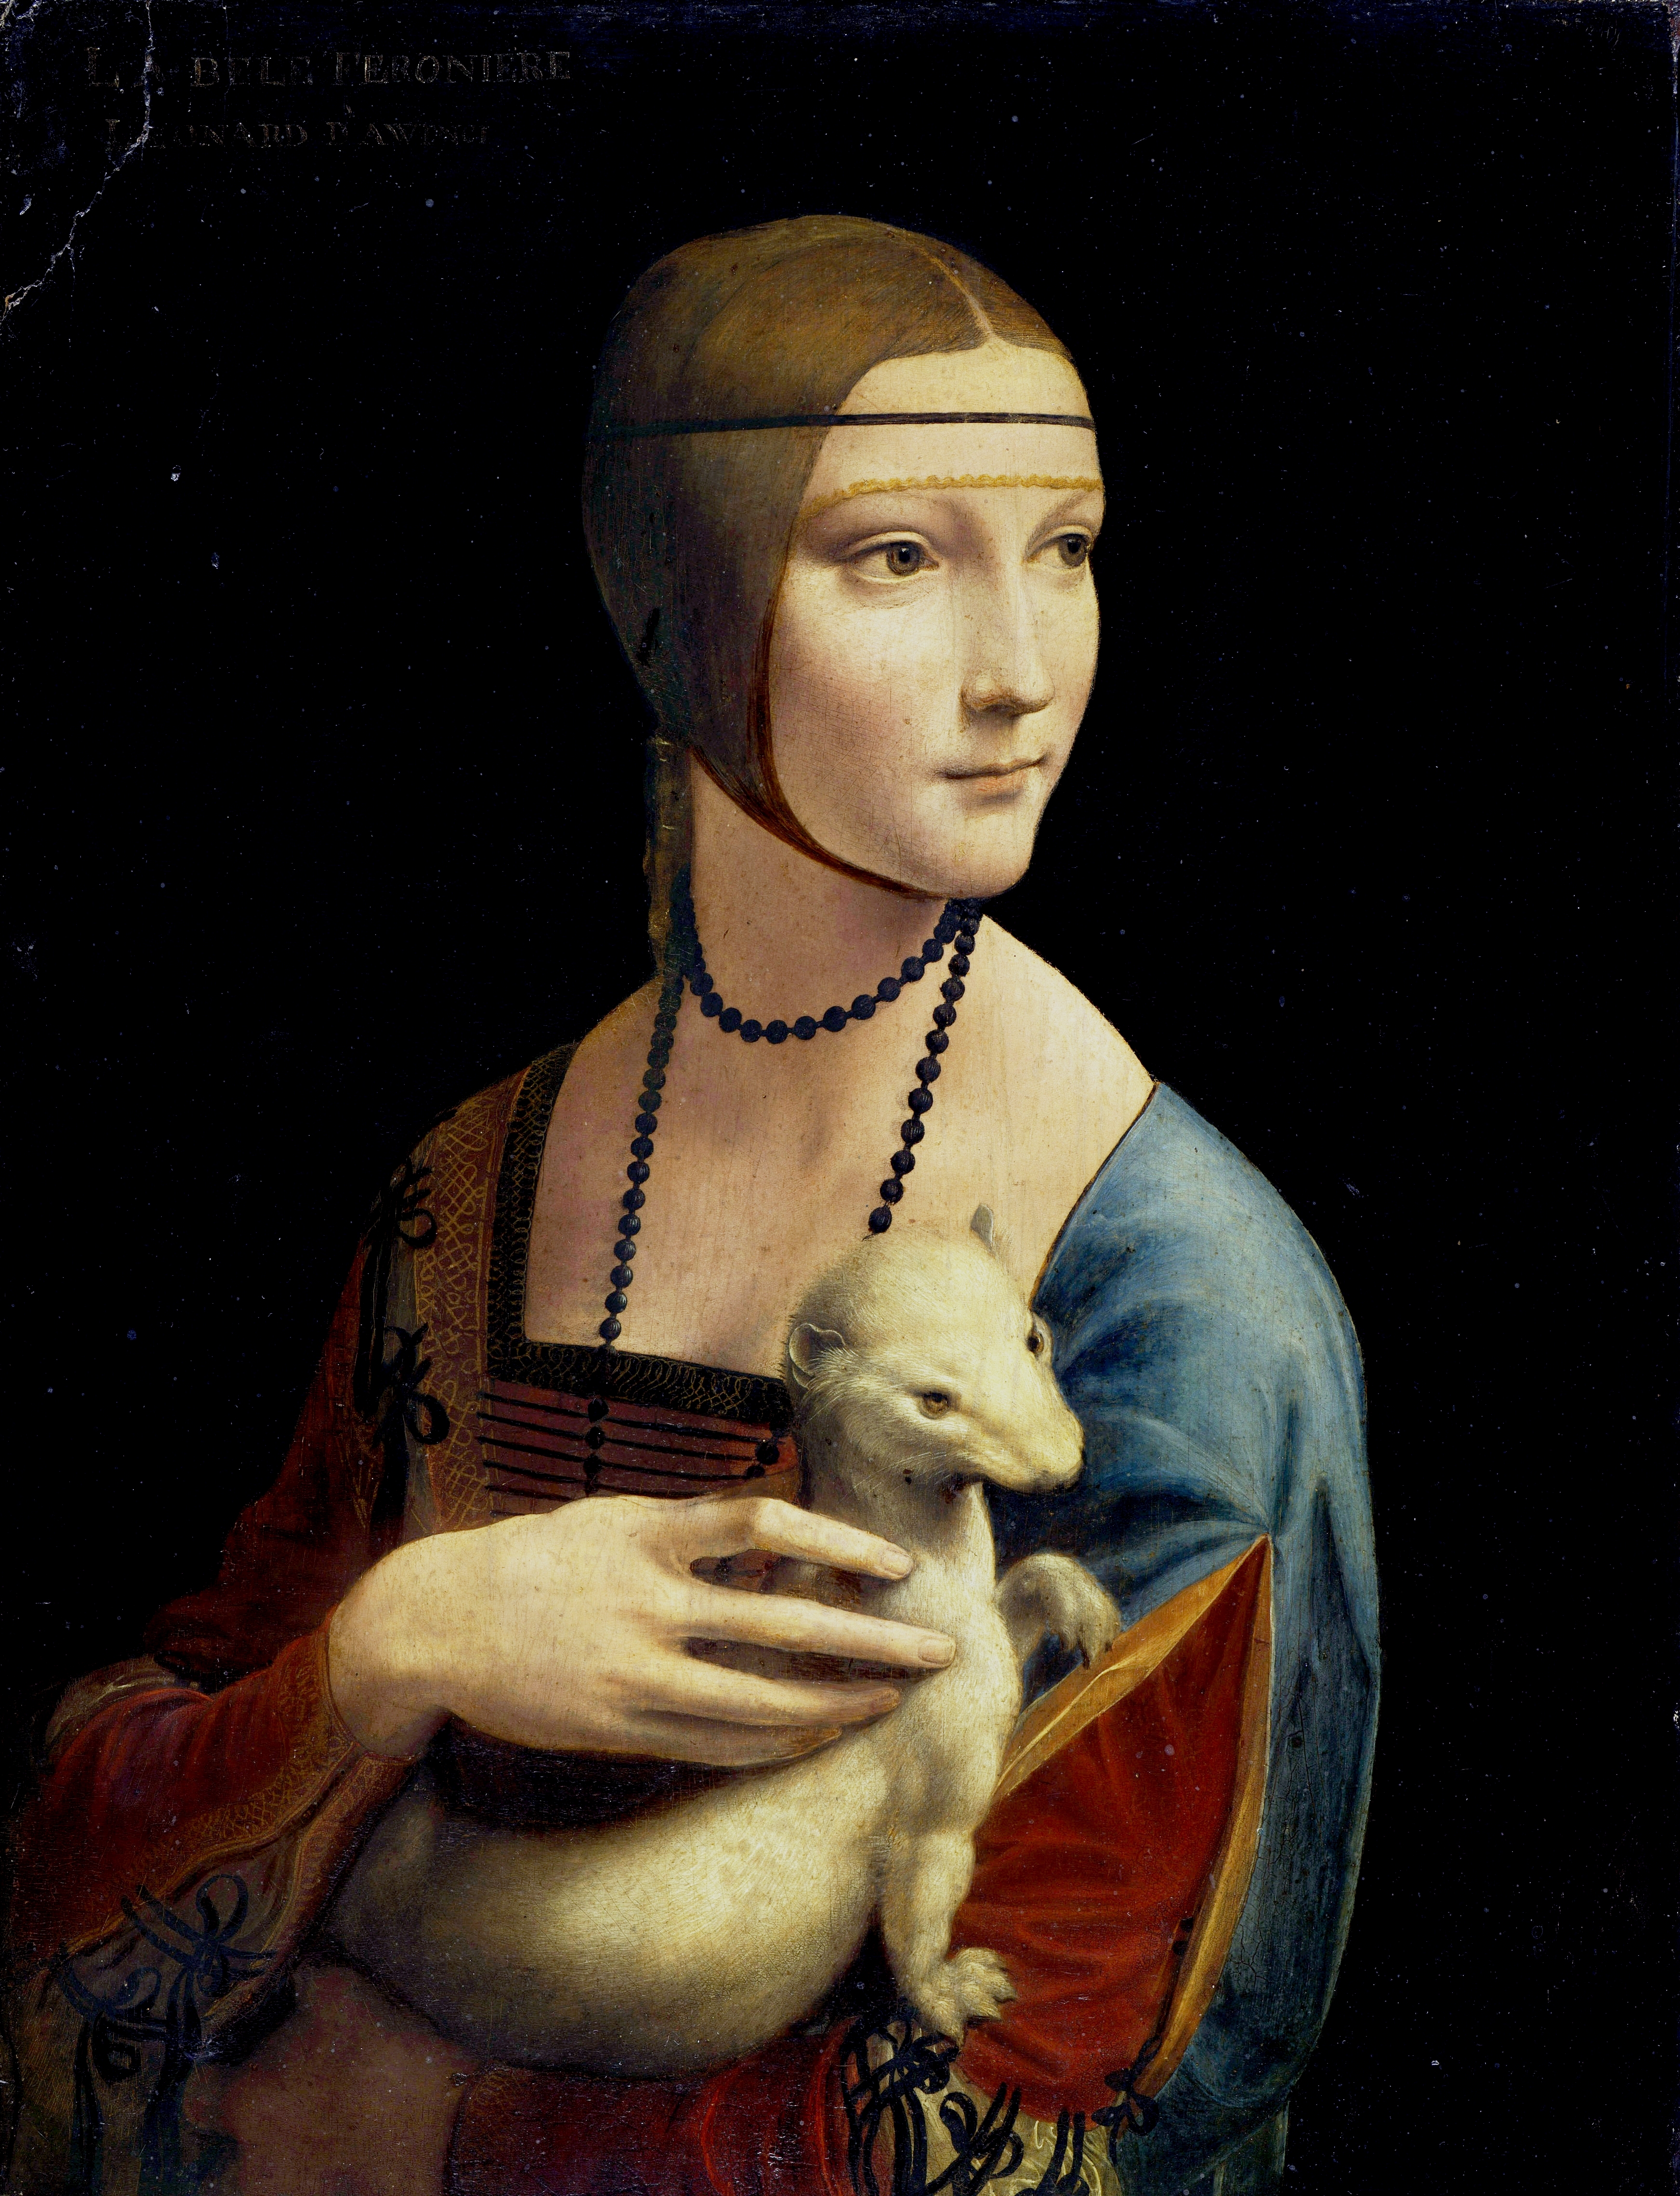 Lady with an Ermine - Wikipedia